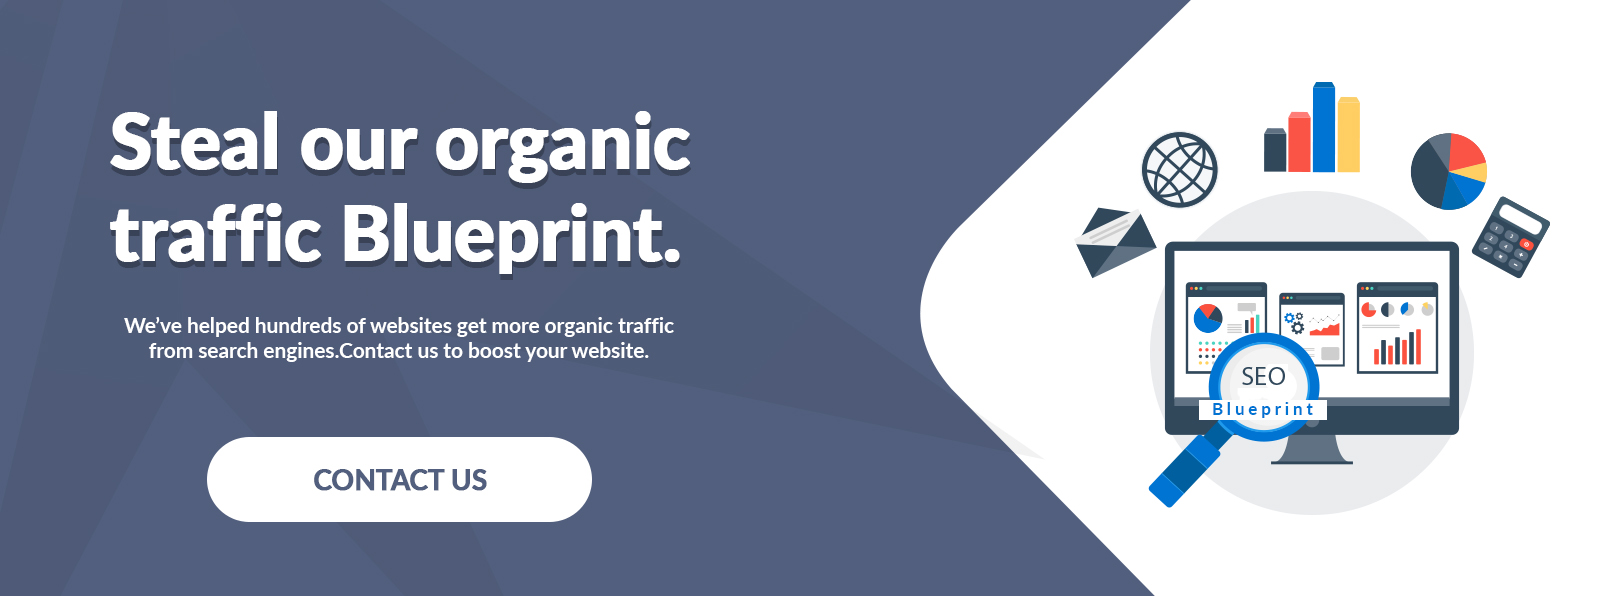 steal our organic traffic blueprint